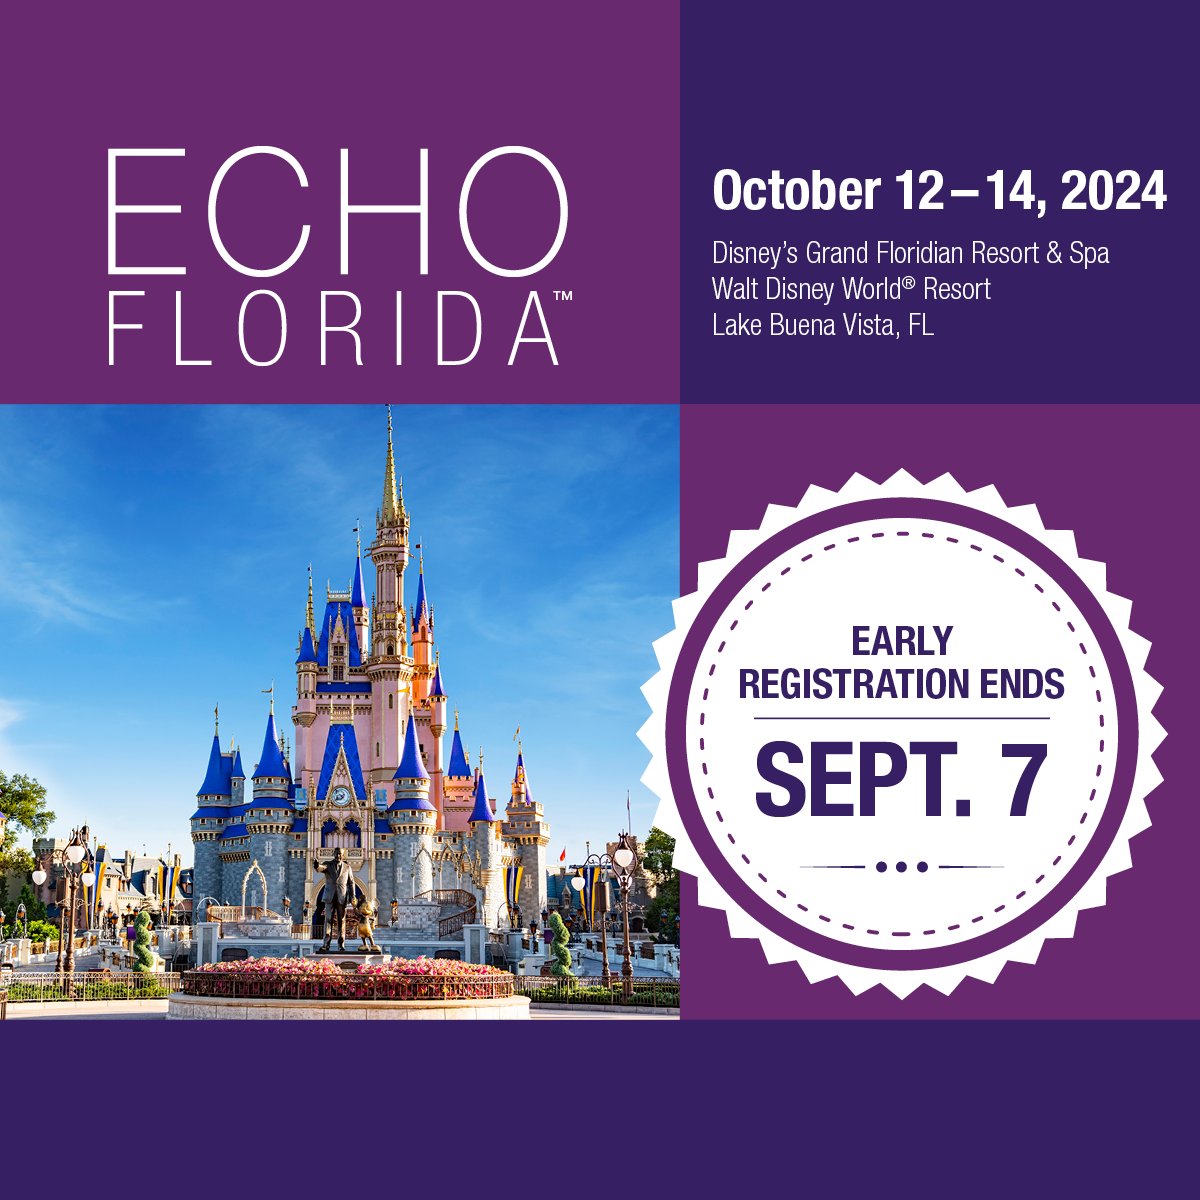 NOW OPEN: Registration has opened for the 12th Annual #EchoFlorida, which will take place October 12-14 at Disney's Grand Floridian Resort & Spa in Lake Buena Vista, Florida. Register early and save up to $225! bit.ly/3V2pT5d